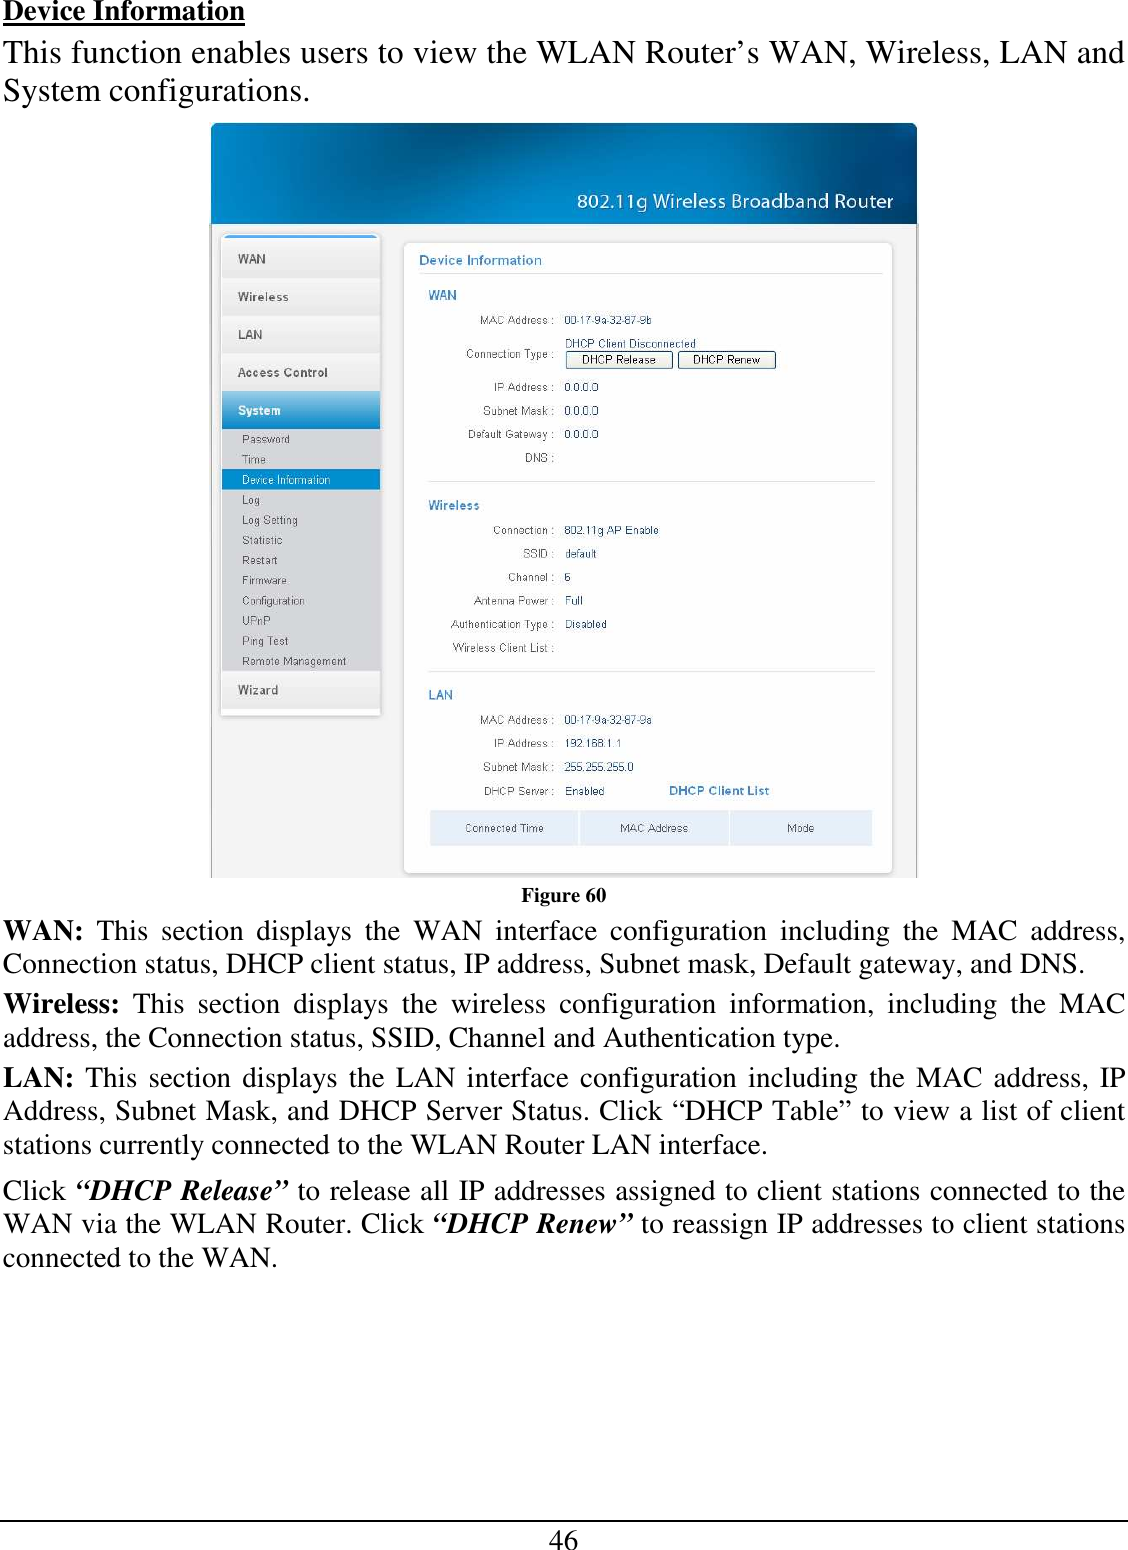 46 Device Information This function enables users to view the WLAN Router’s WAN, Wireless, LAN and System configurations.  Figure 60 WAN:  This  section  displays  the  WAN  interface  configuration  including  the  MAC  address, Connection status, DHCP client status, IP address, Subnet mask, Default gateway, and DNS.  Wireless:  This  section  displays  the  wireless  configuration  information,  including  the  MAC address, the Connection status, SSID, Channel and Authentication type. LAN: This section displays the LAN interface configuration including the MAC address, IP Address, Subnet Mask, and DHCP Server Status. Click “DHCP Table” to view a list of client stations currently connected to the WLAN Router LAN interface. Click “DHCP Release” to release all IP addresses assigned to client stations connected to the WAN via the WLAN Router. Click “DHCP Renew” to reassign IP addresses to client stations connected to the WAN. 